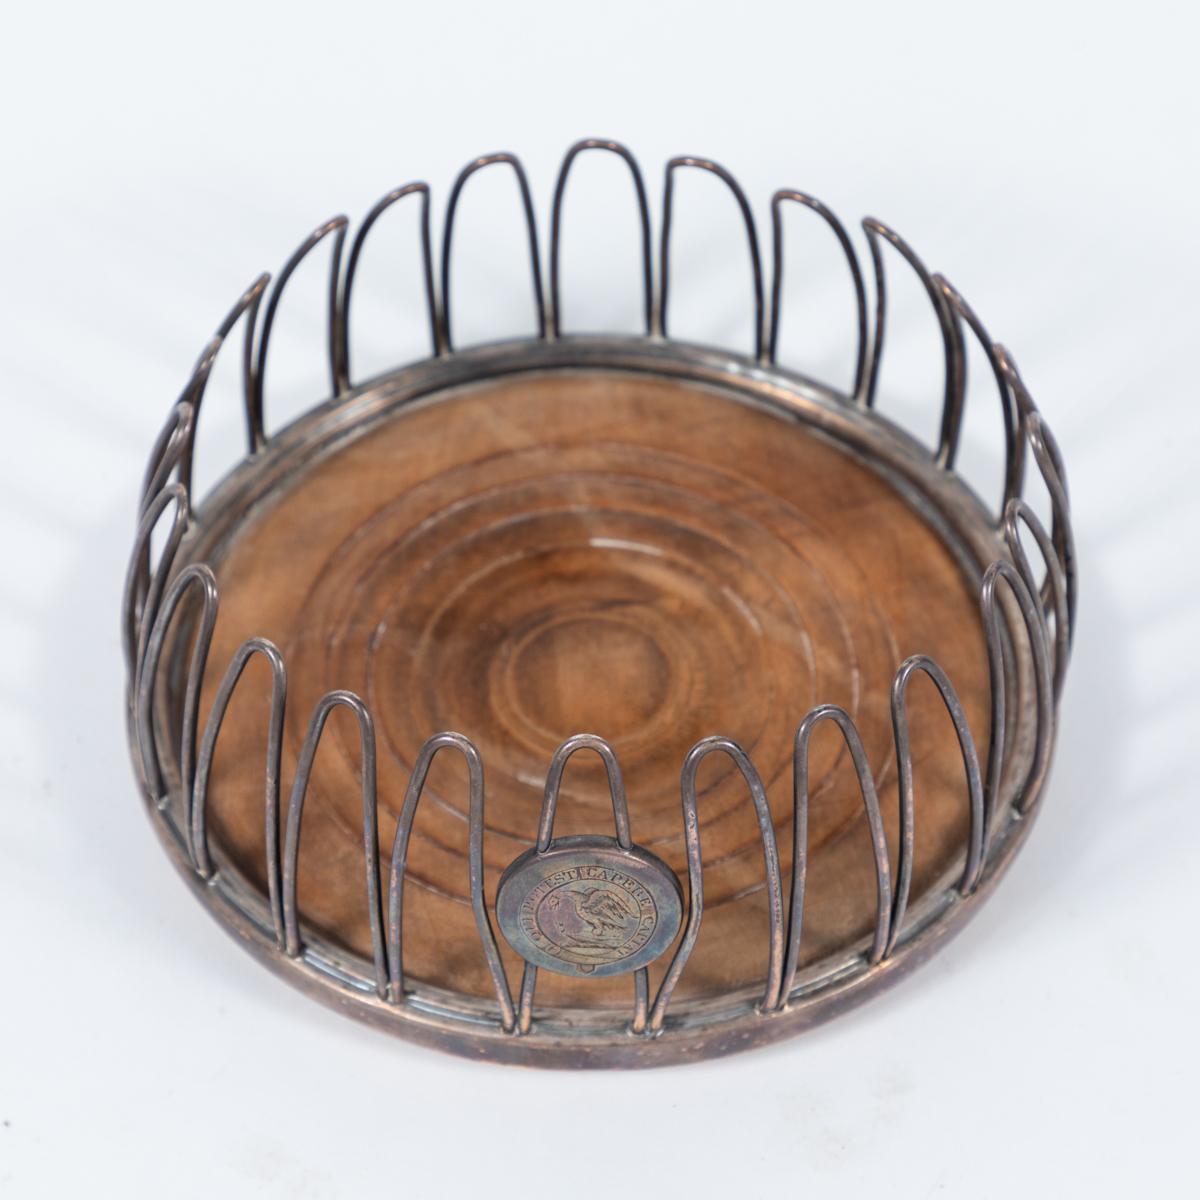 Mid-19th-century Sheffield silver champagne coaster with carved wooden base. The looped wire pickets create a supportive buttress for a bottle or flask, and feature a small commemorative or heraldic disc accent, inscribed with a carving of two birds